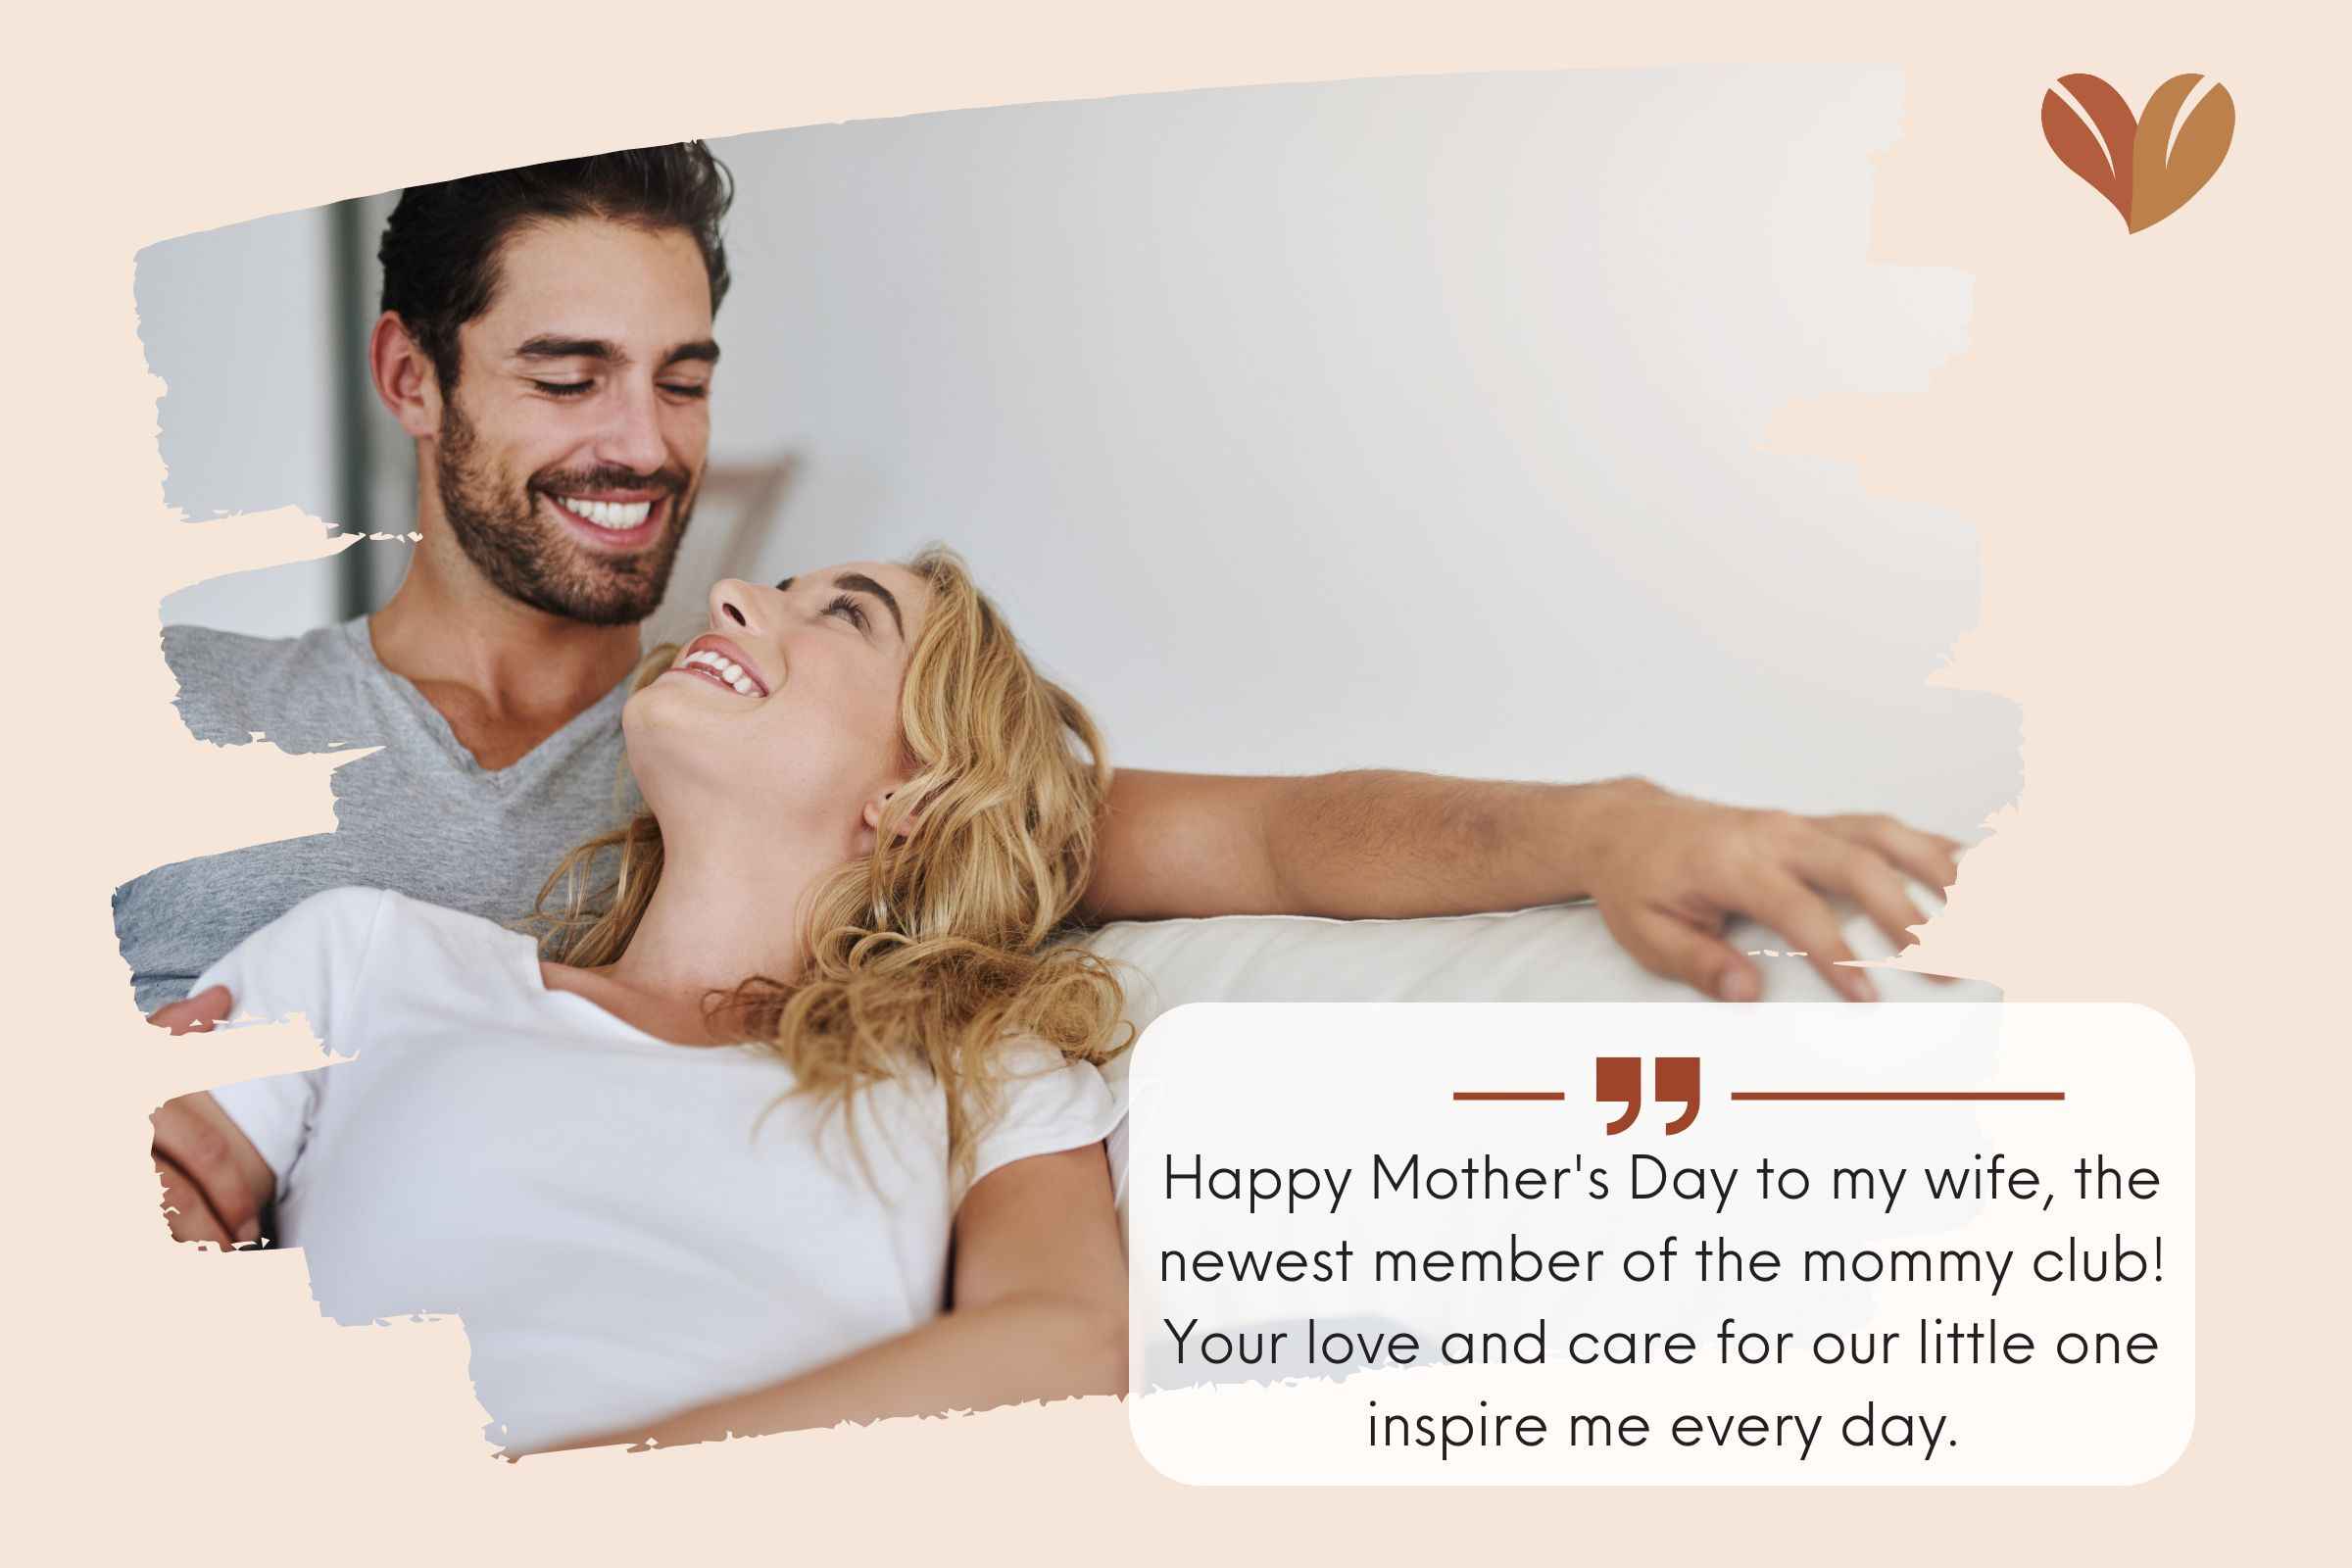 Heartfelt Happy Mother's Day Message to My Wife